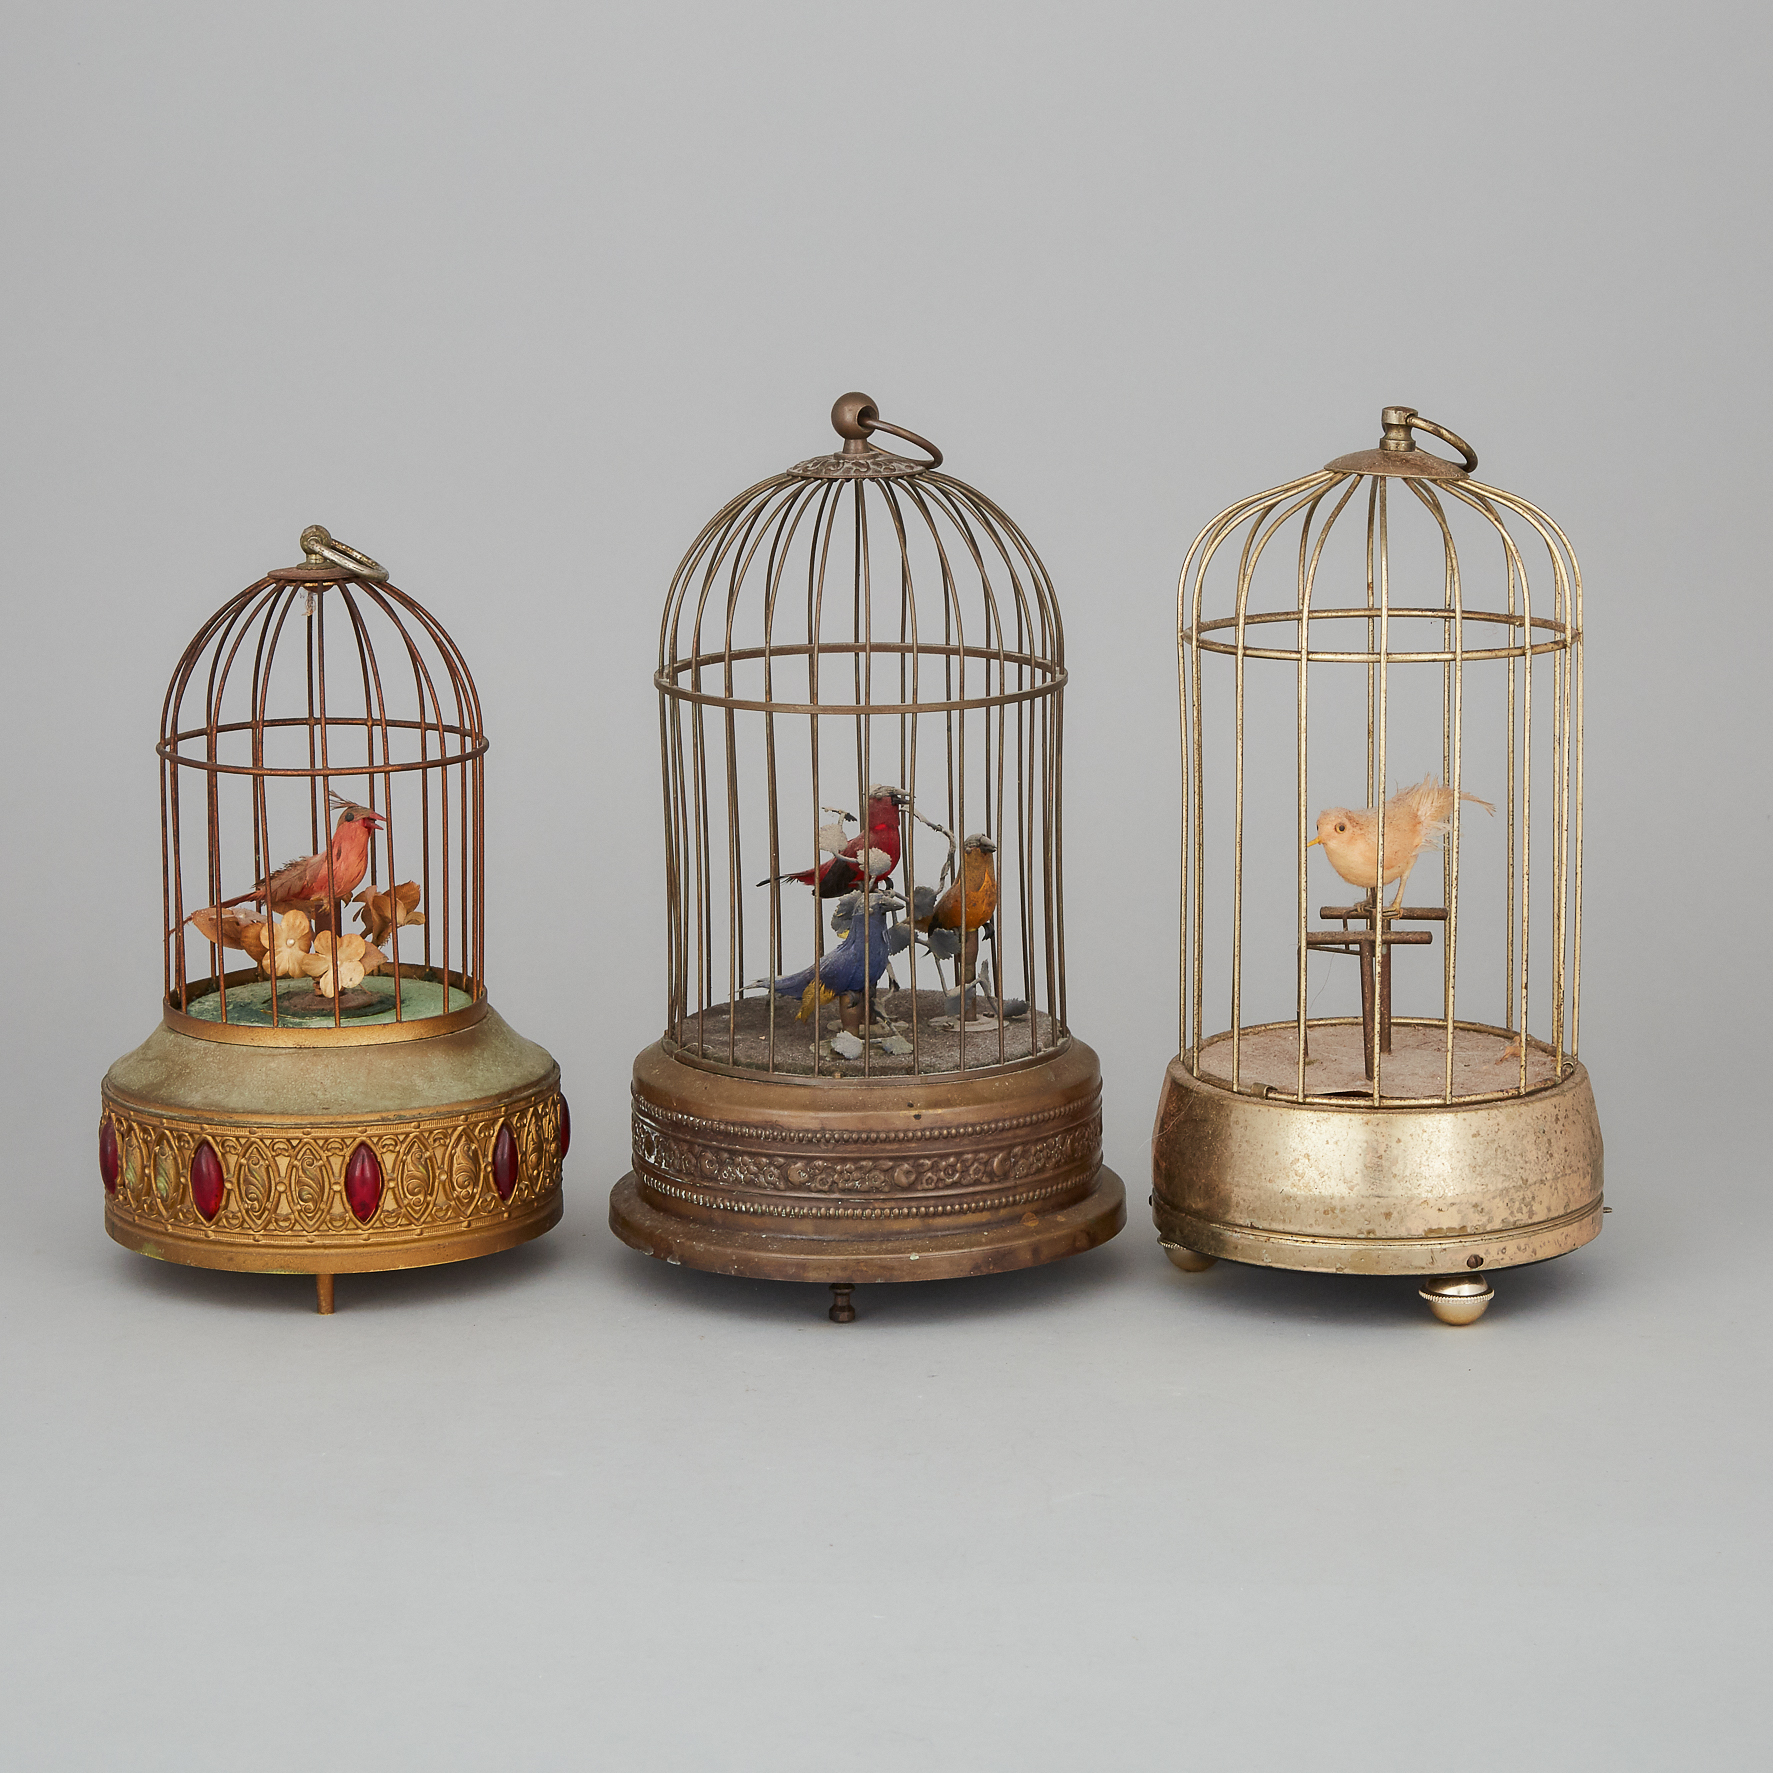 Group of Three Swiss or German Automaton Singing Birds in Cages, early-mid 20th century